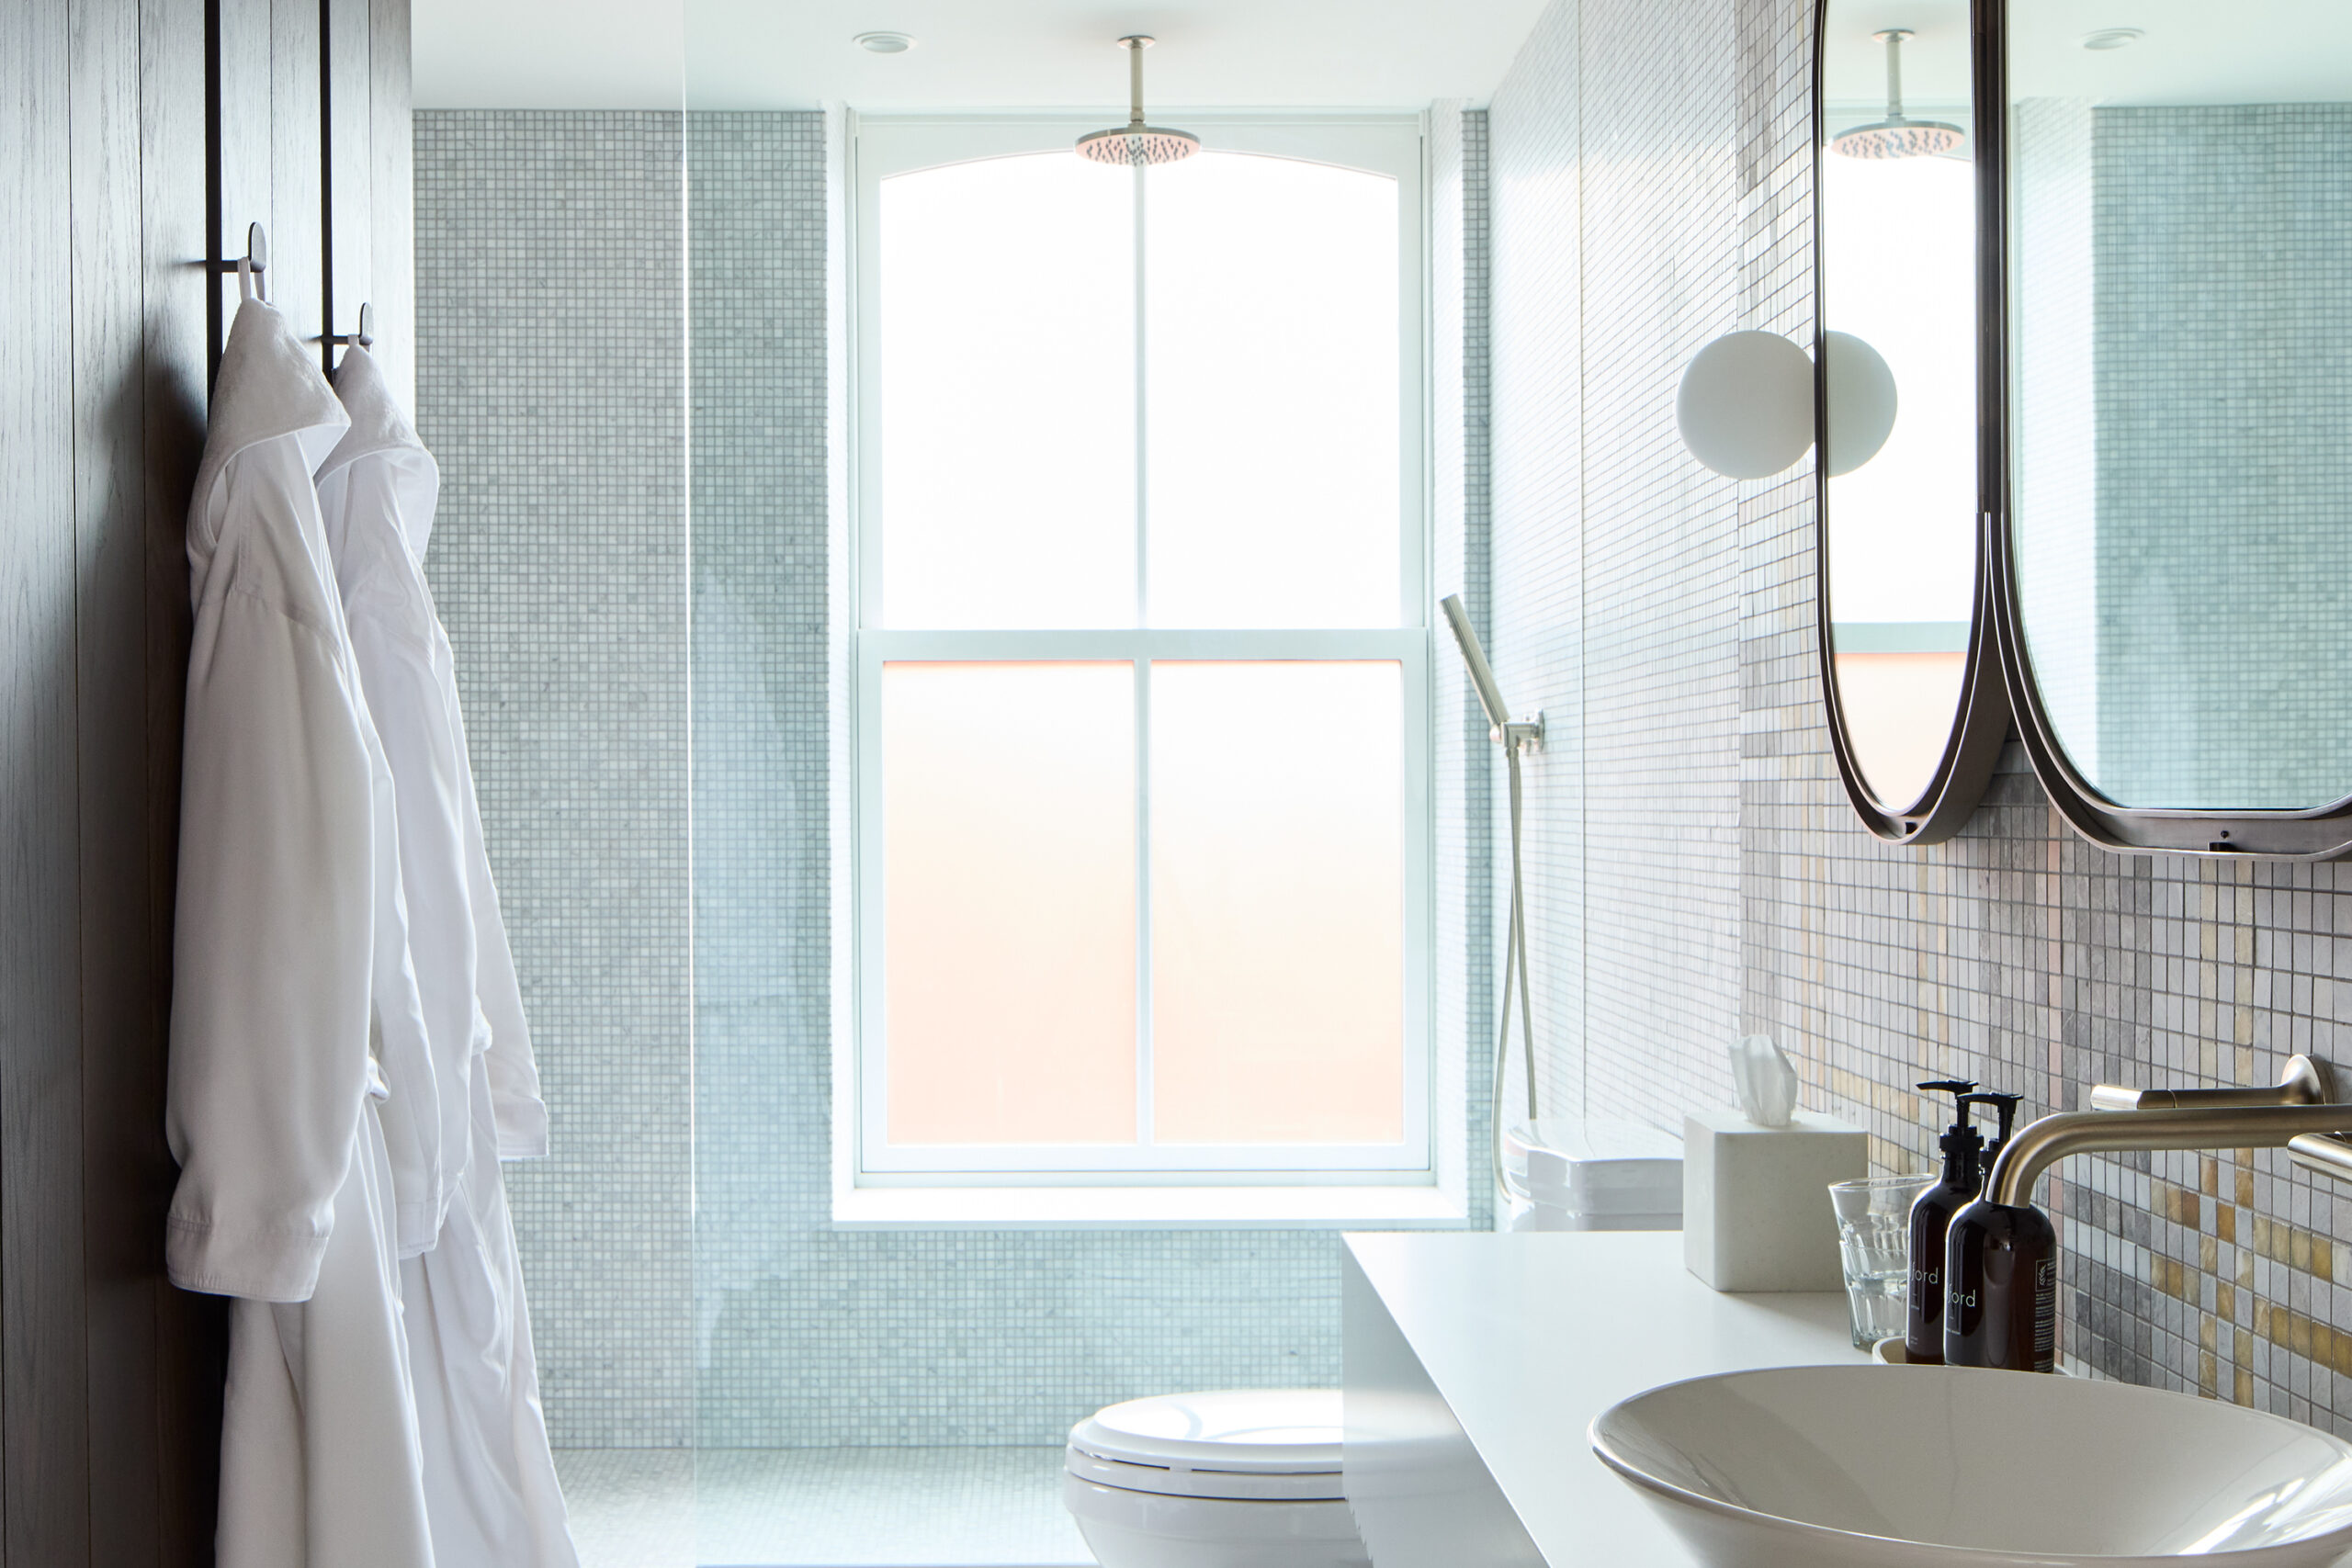 Brightly lit bathroom tiled from floor to ceiling with two white robes